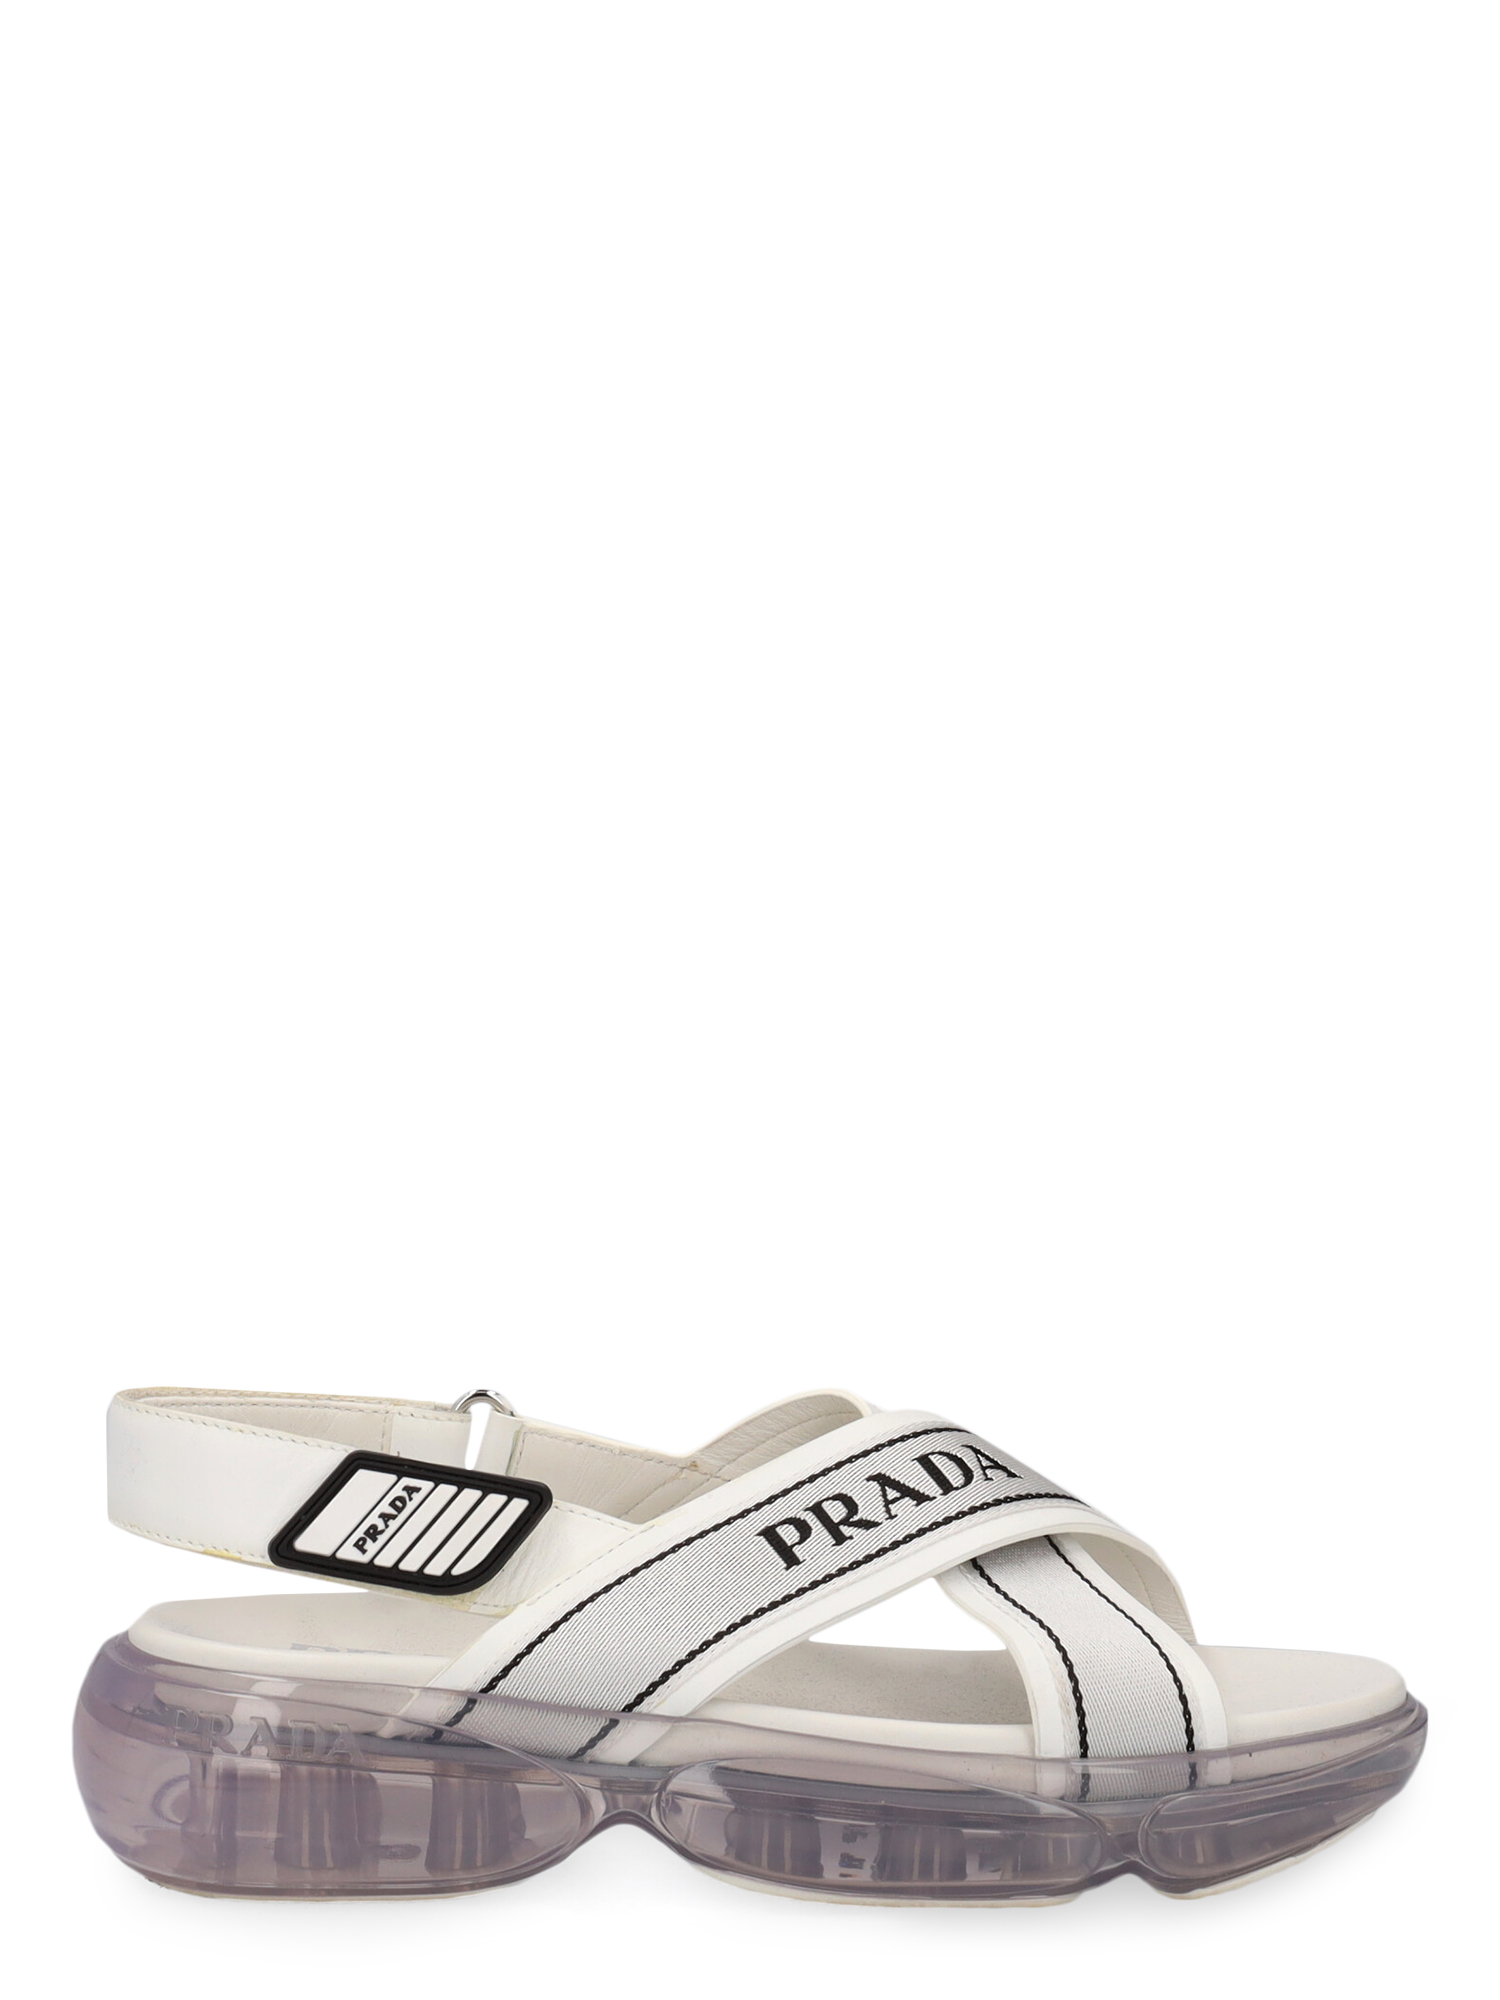 Pre-owned Prada Women's Sandals -  - In White Synthetic Fibers